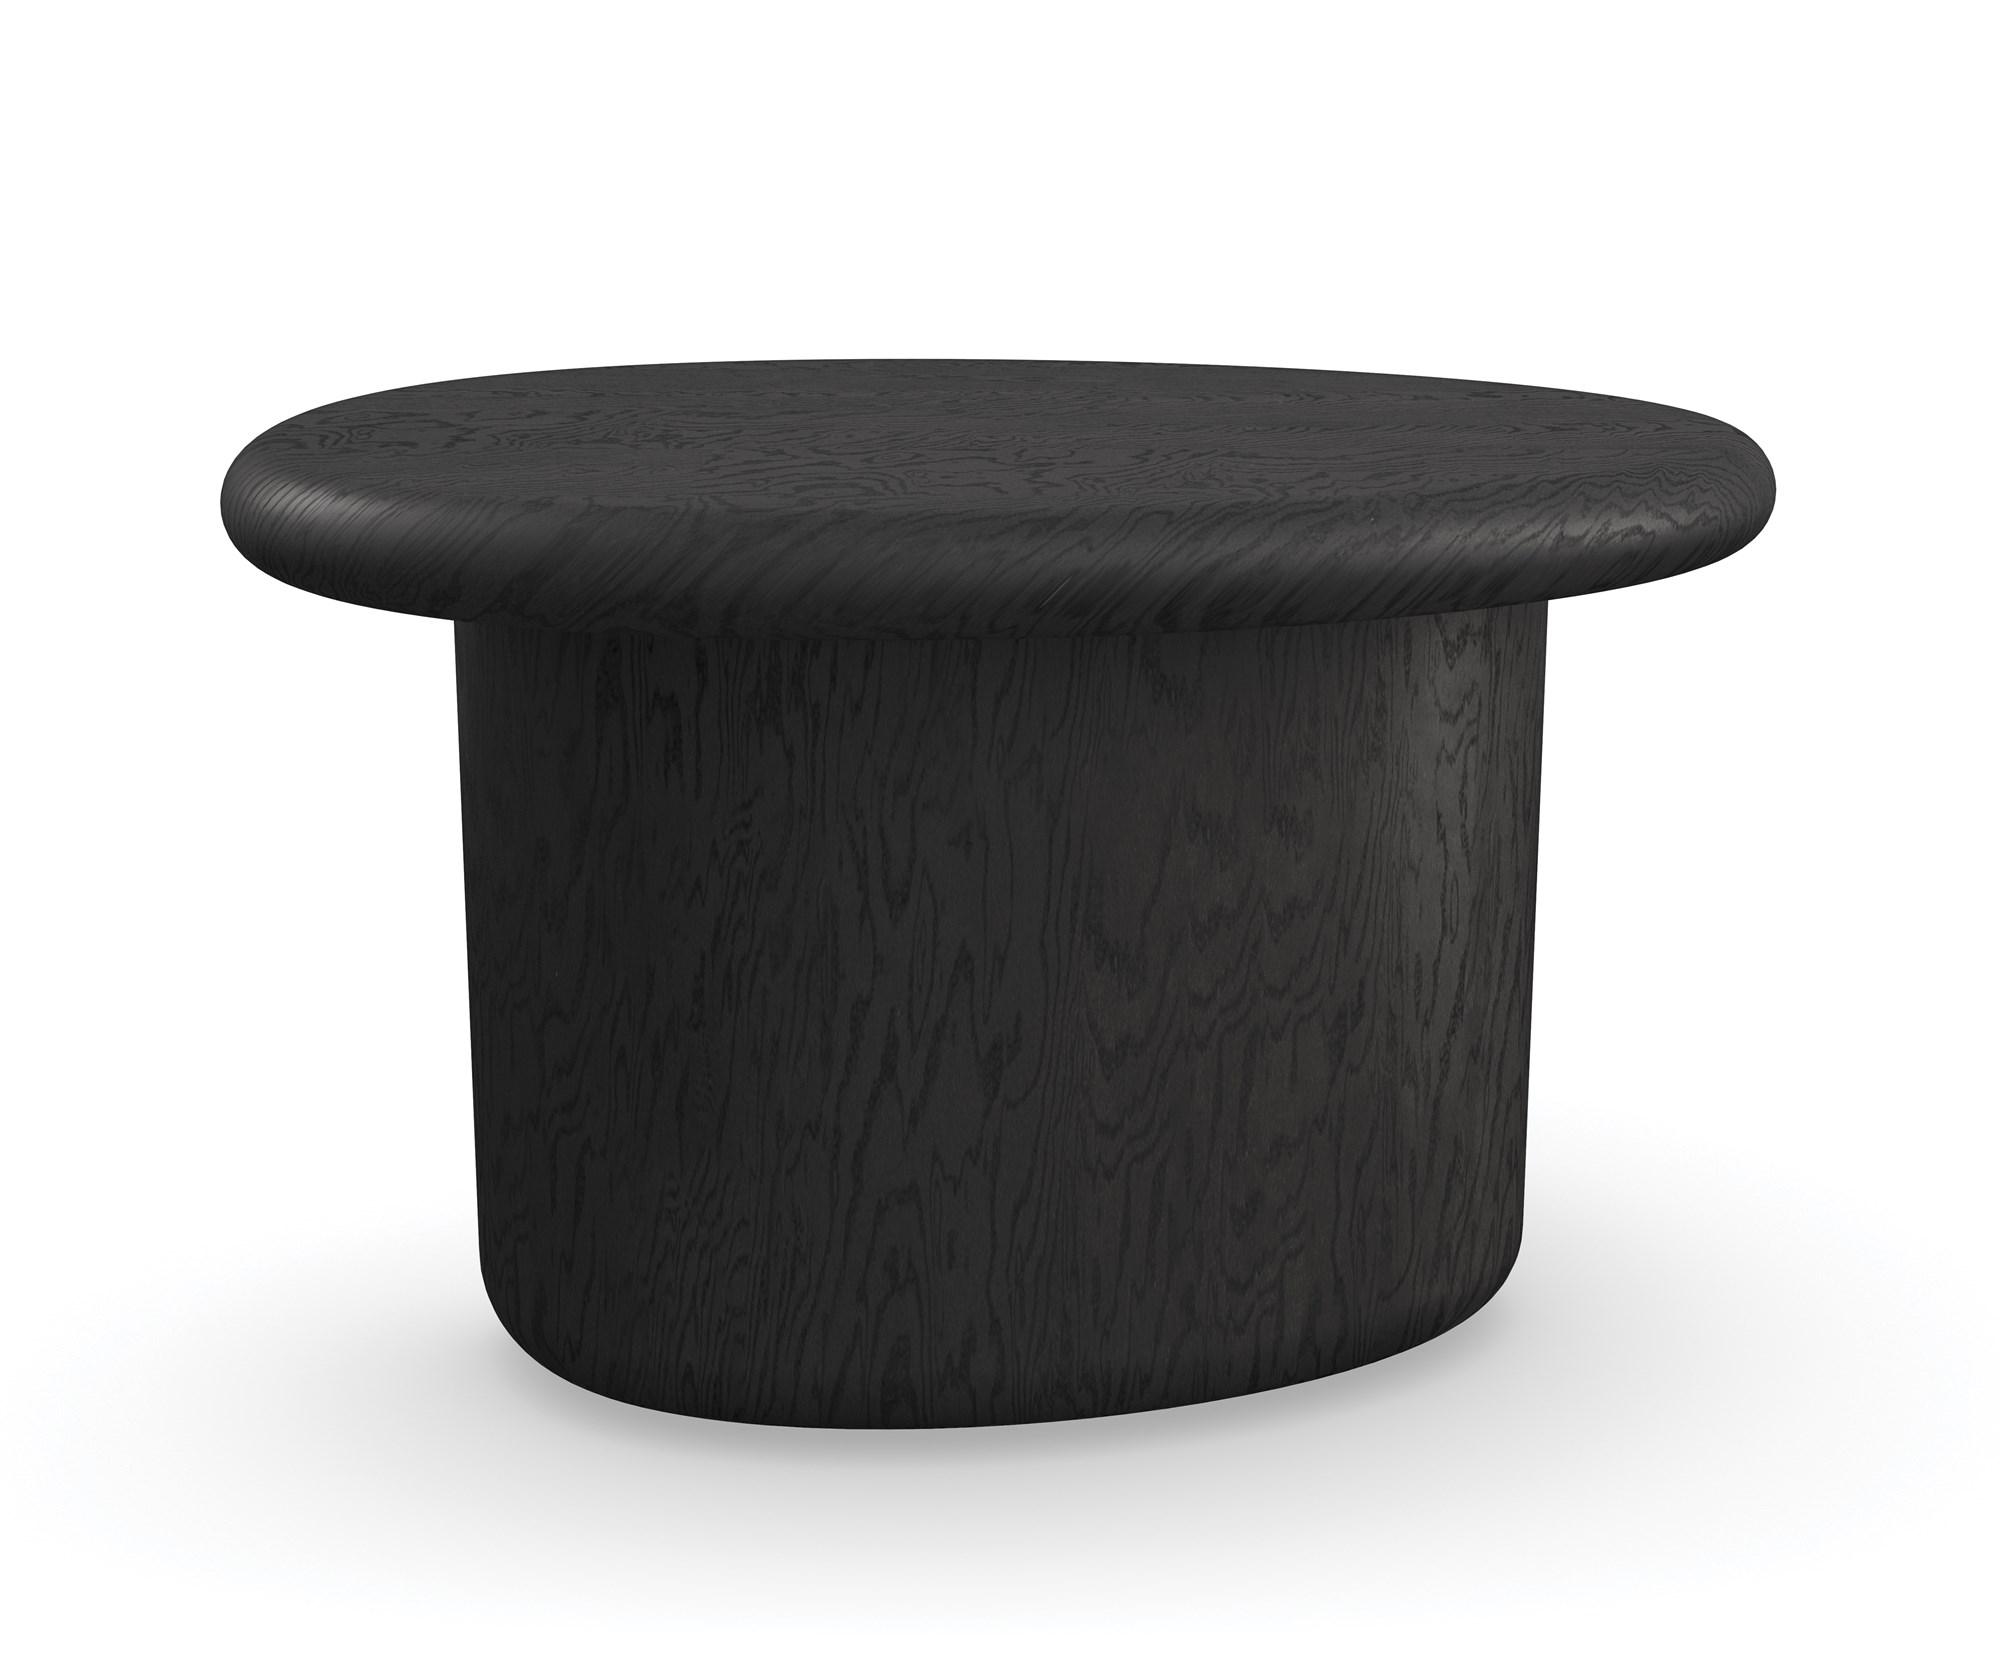 

    
Coal Finish Tamo Ash Wood Veneers ORION SMALL SIDE TABLE by Caracole
